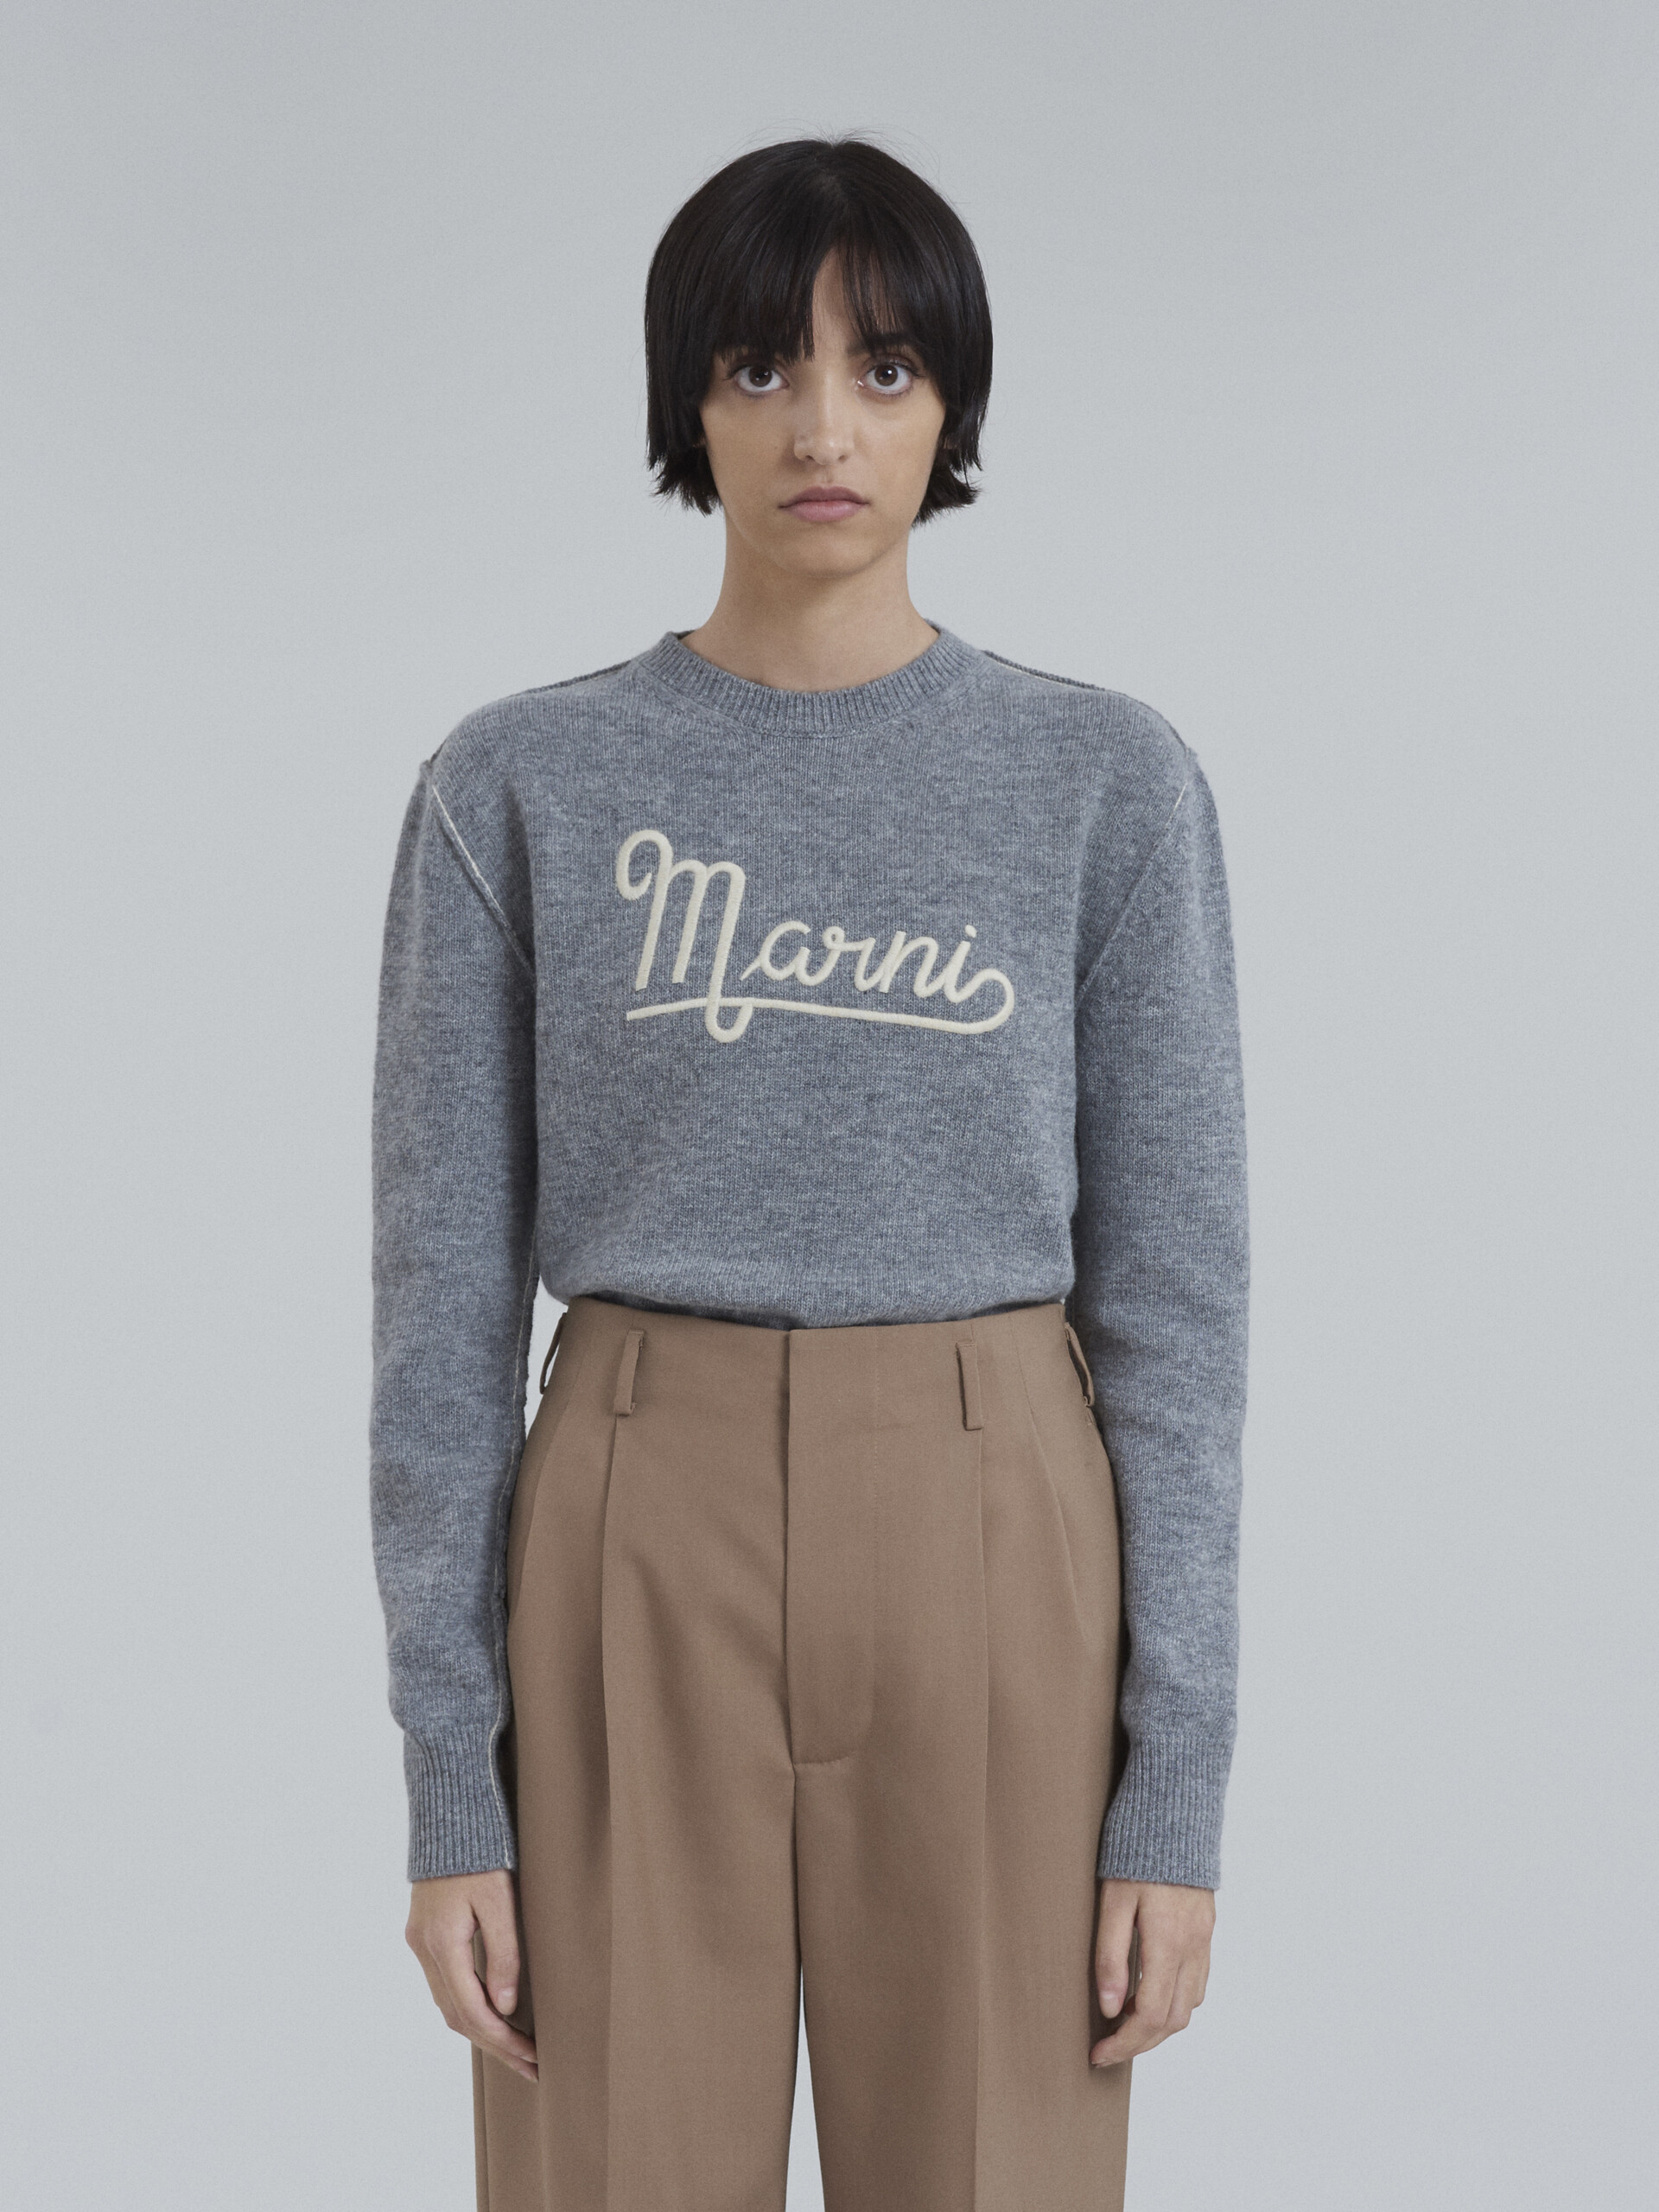 Grey Shetland wool long-sleeved sweater with embroidered Marni logo - Pullovers - Image 2